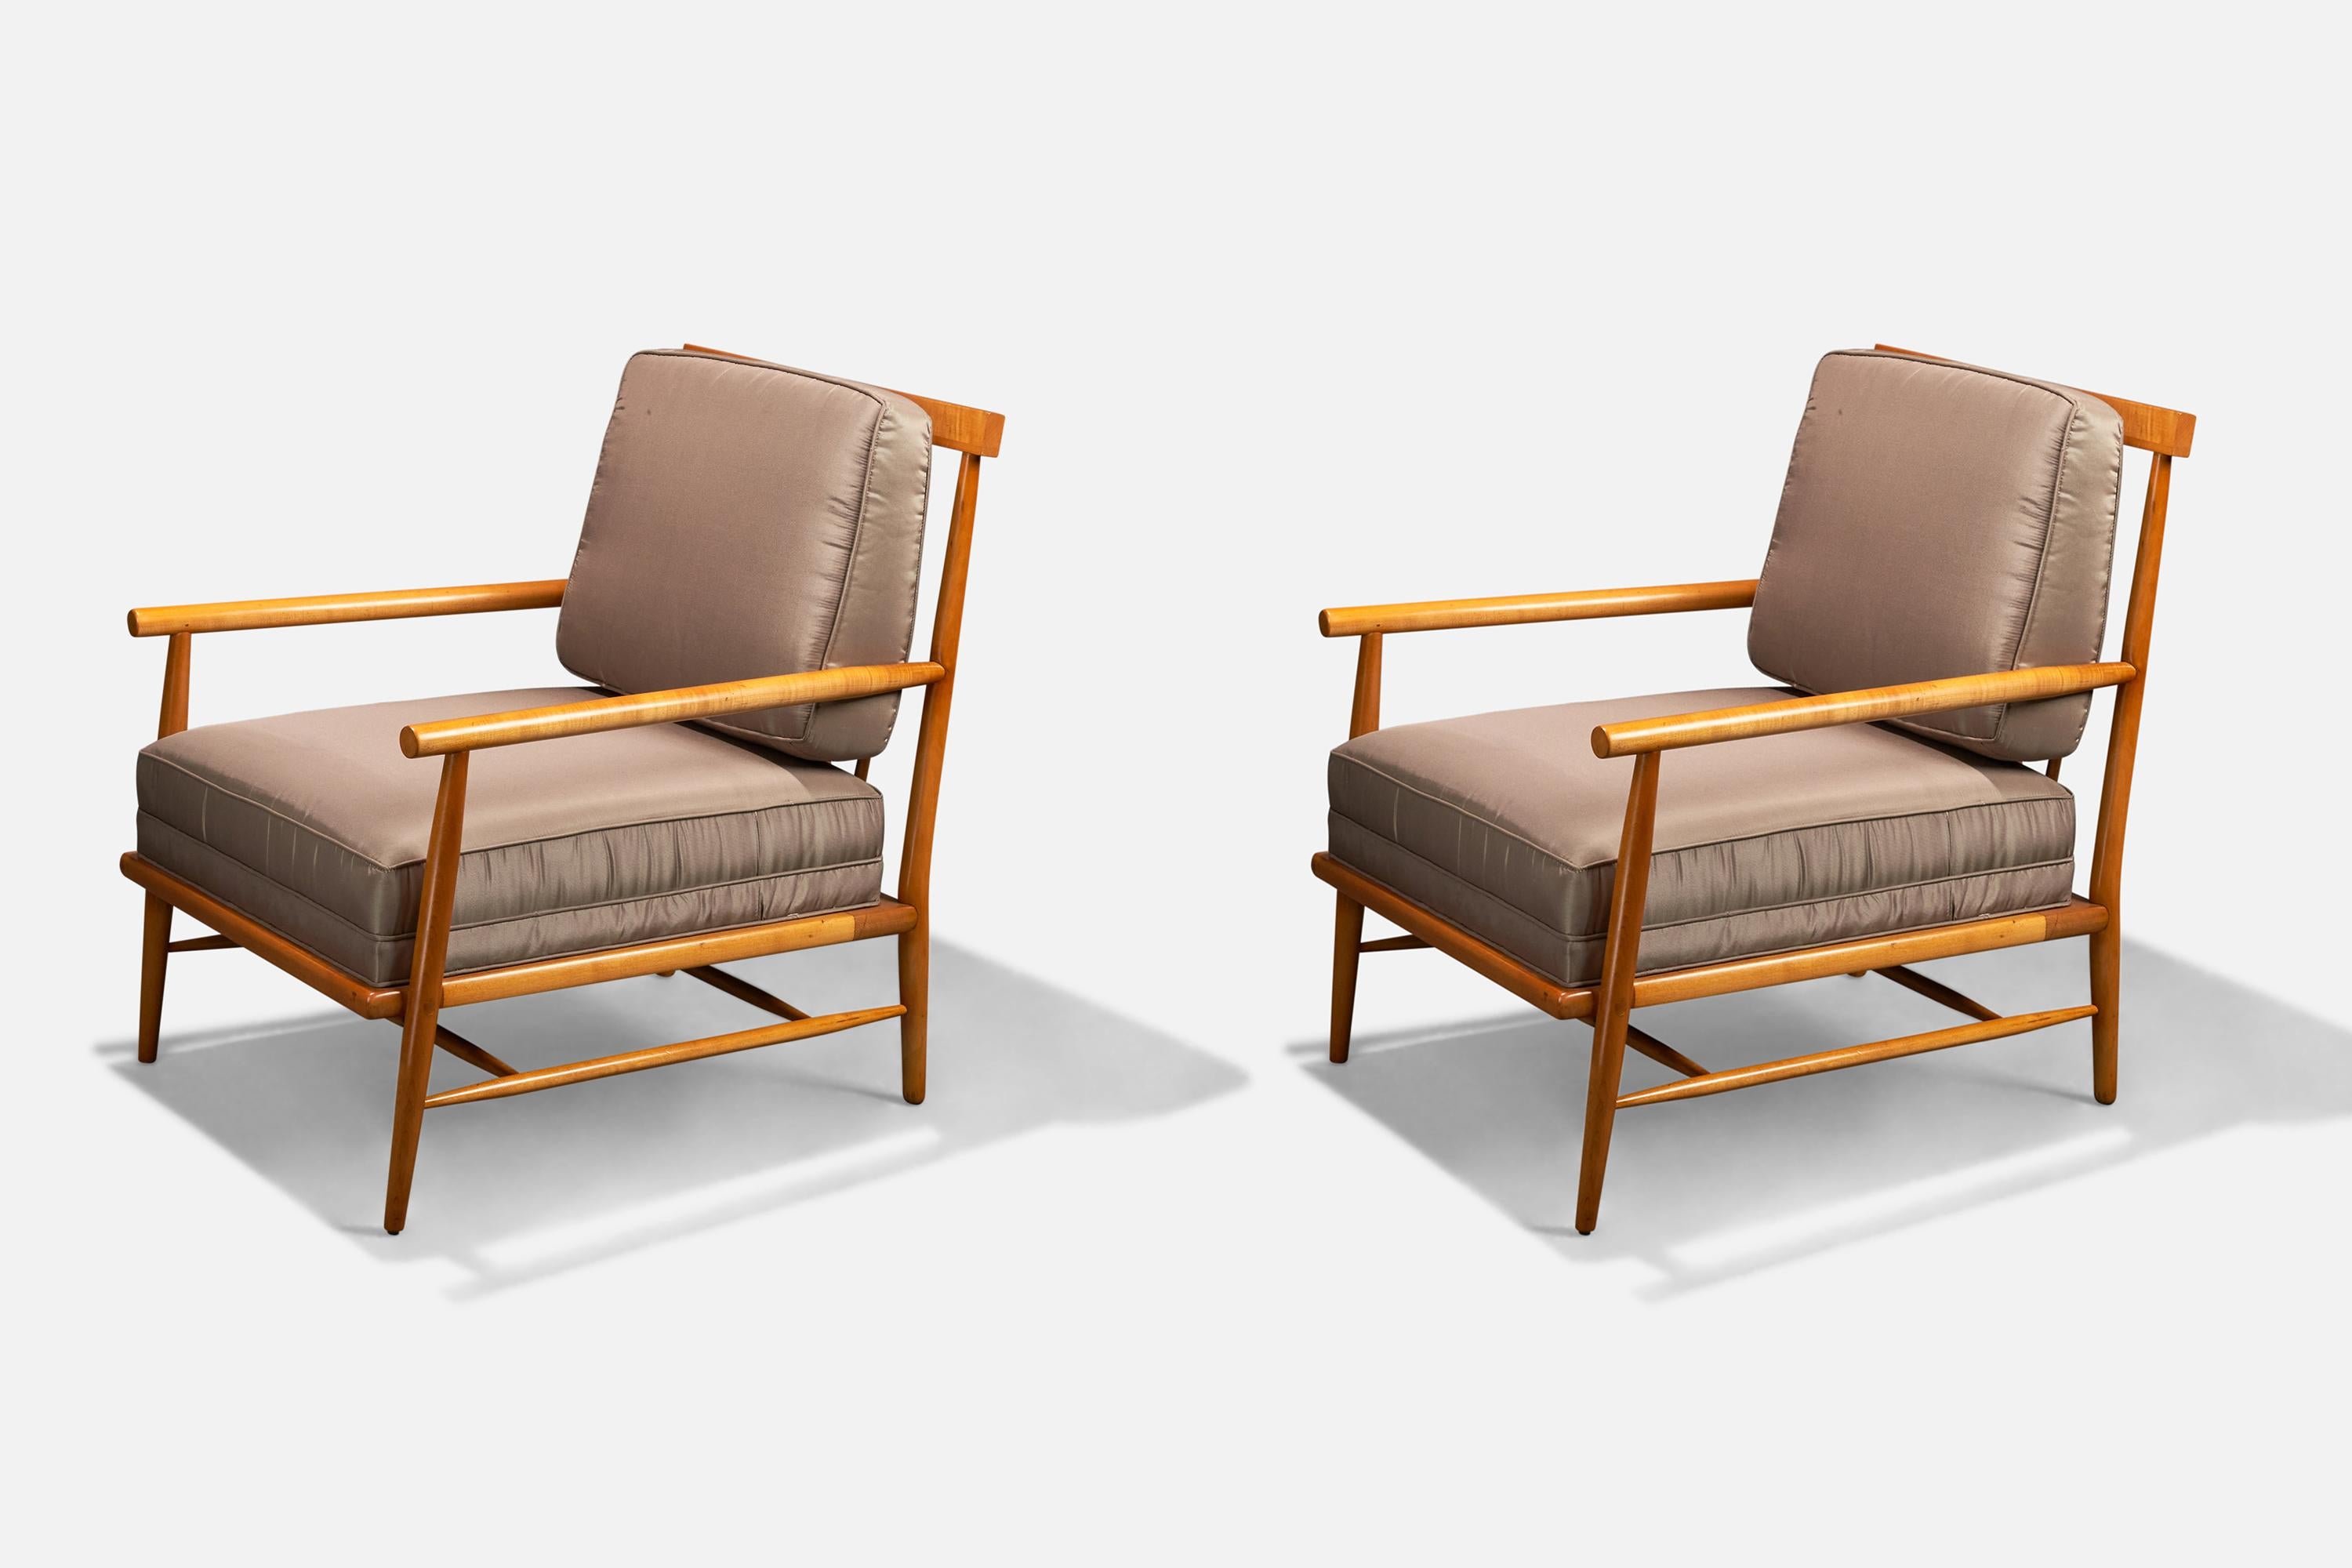 A pair of maple and grey fabric lounge chairs designed by Paul McCobb and produced by O'Hearn Furniture, USA, 1952.